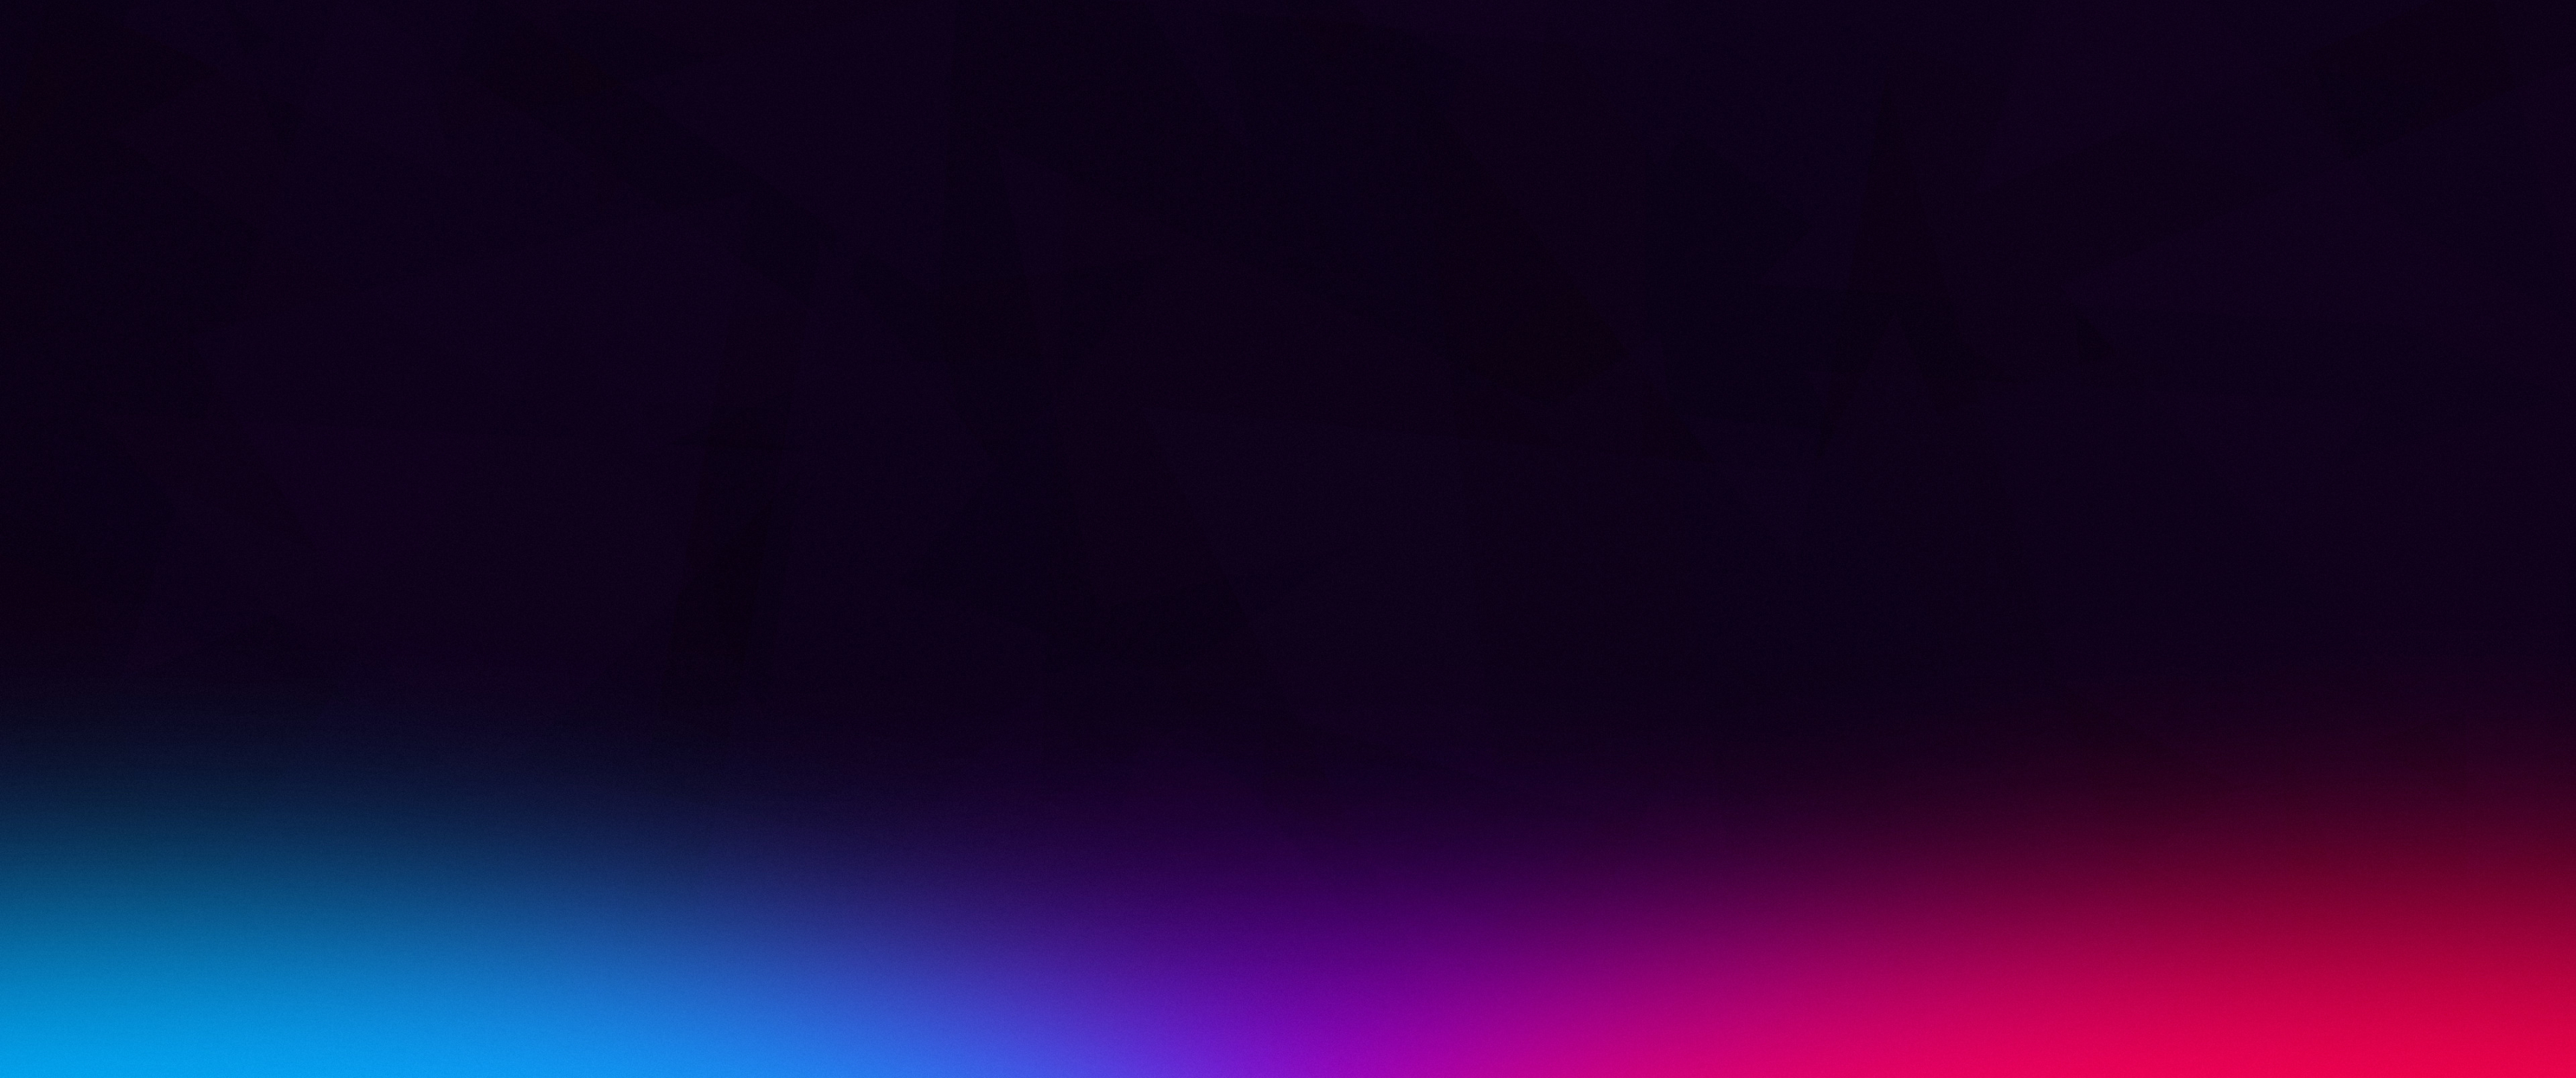 3440x1440 Neon Gradient Minimalist 3440x1440 Resolution Wallpaper, HD  Abstract 4K Wallpapers, Images, Photos and Background - Wallpapers Den